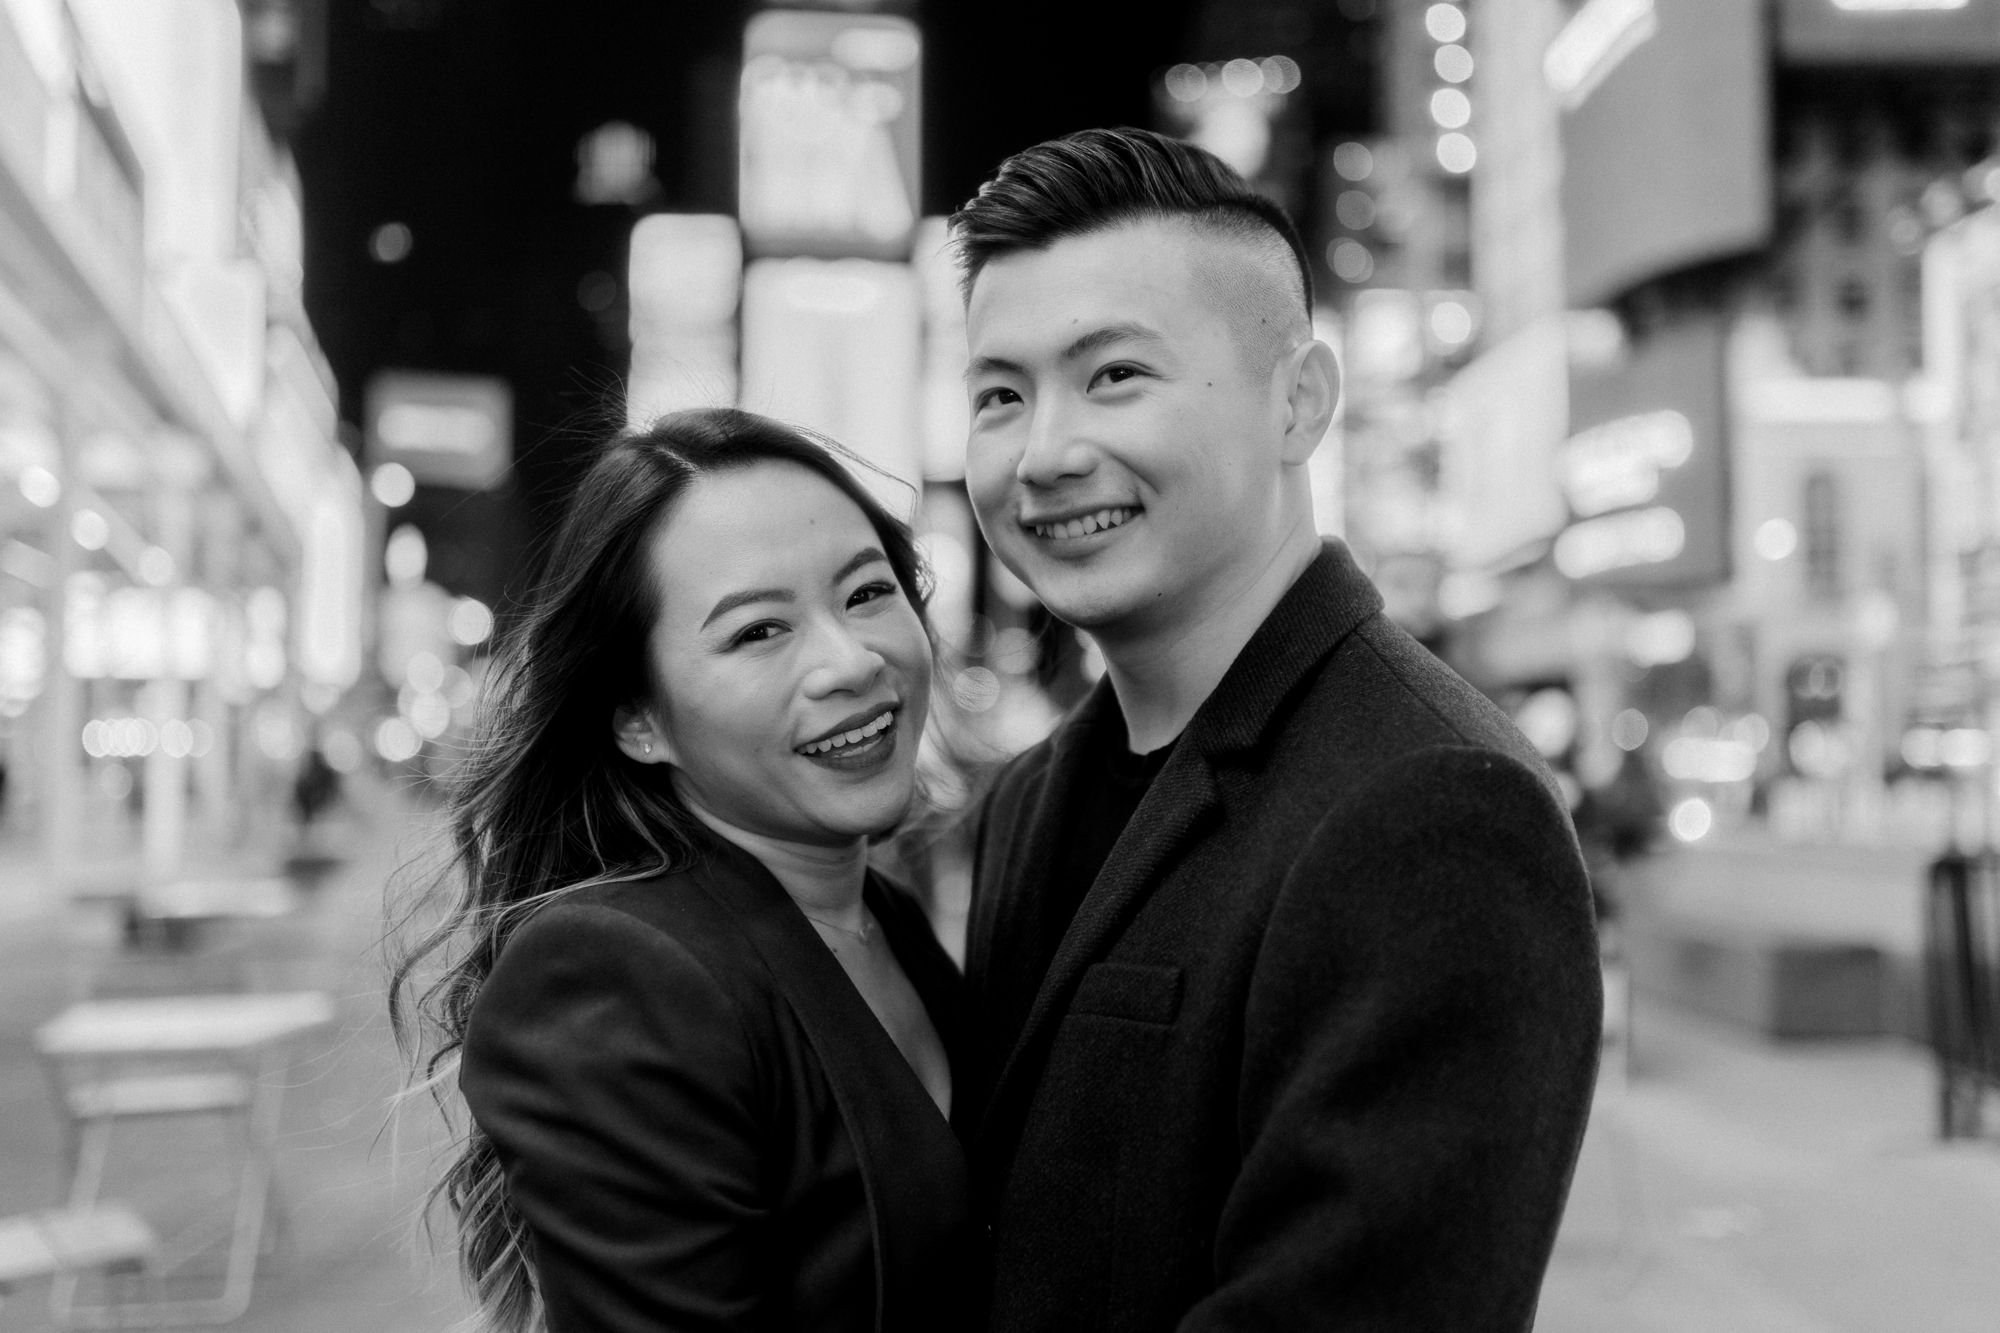 Romantic Nighttime Winter Engagement Photos in New York's Iconic Times Square